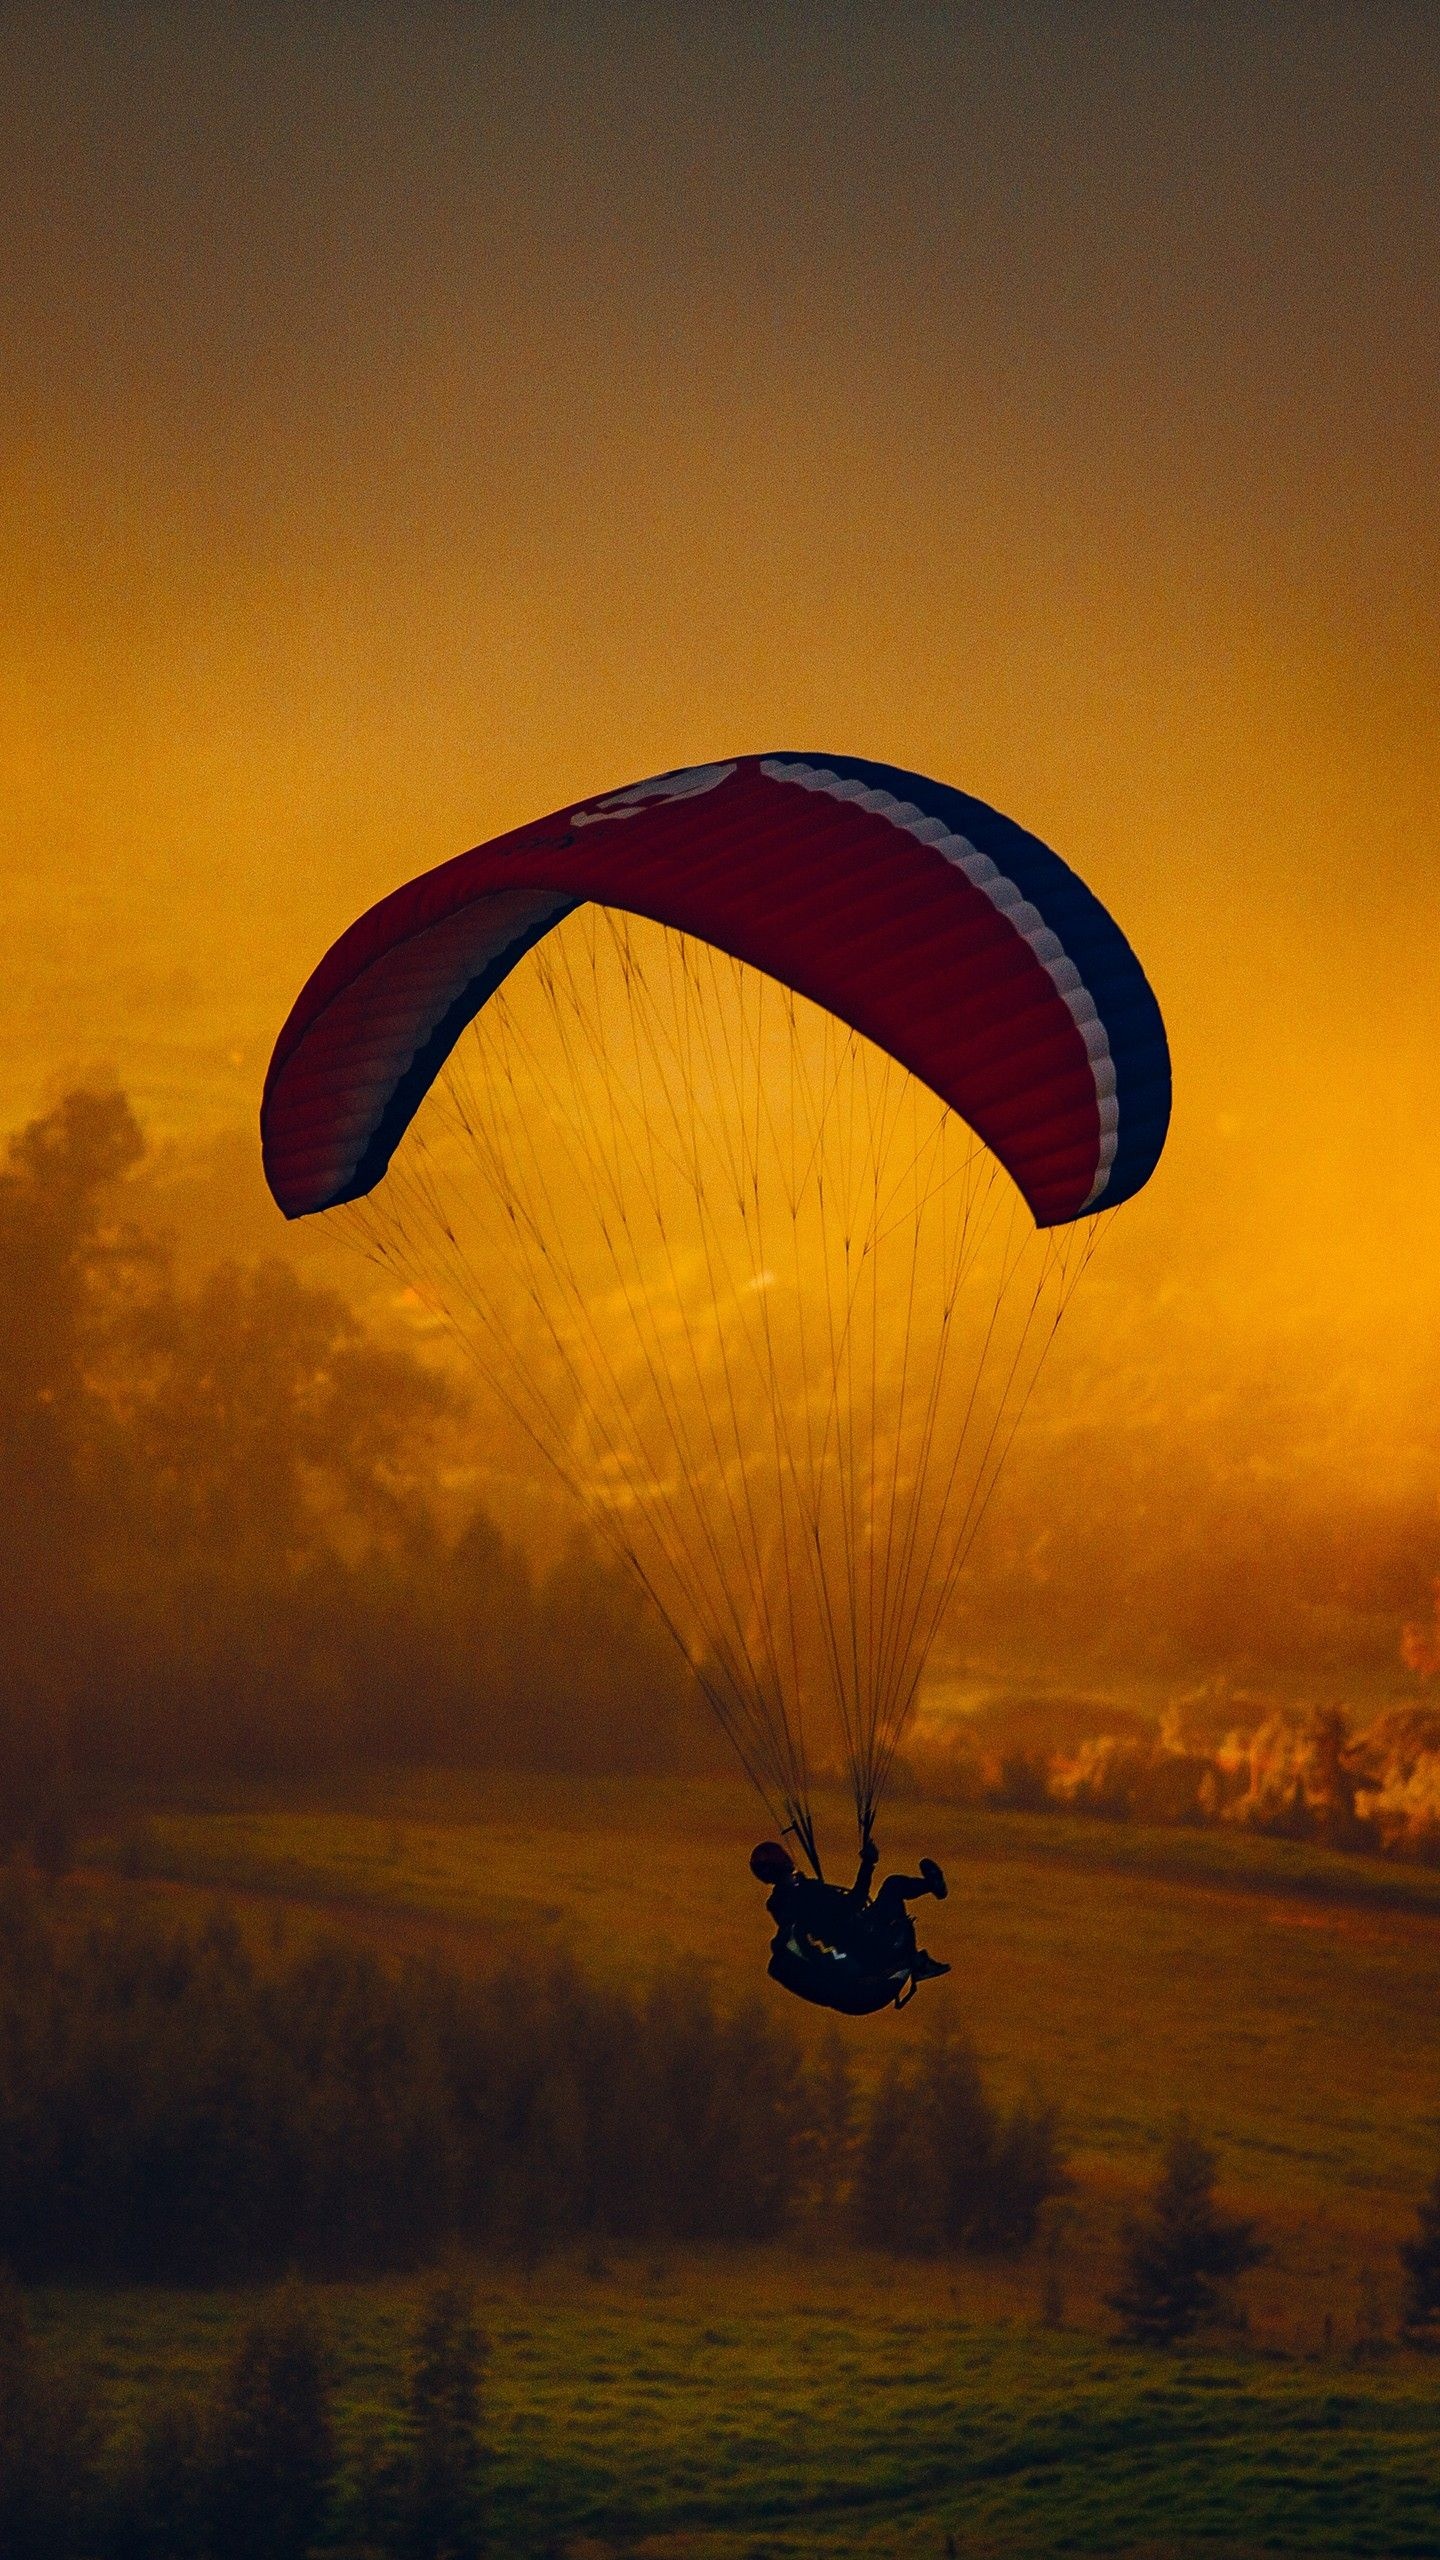 Paragliding: Lightweight foot-launched aircraft, Operated parachute in the air. 1440x2560 HD Background.